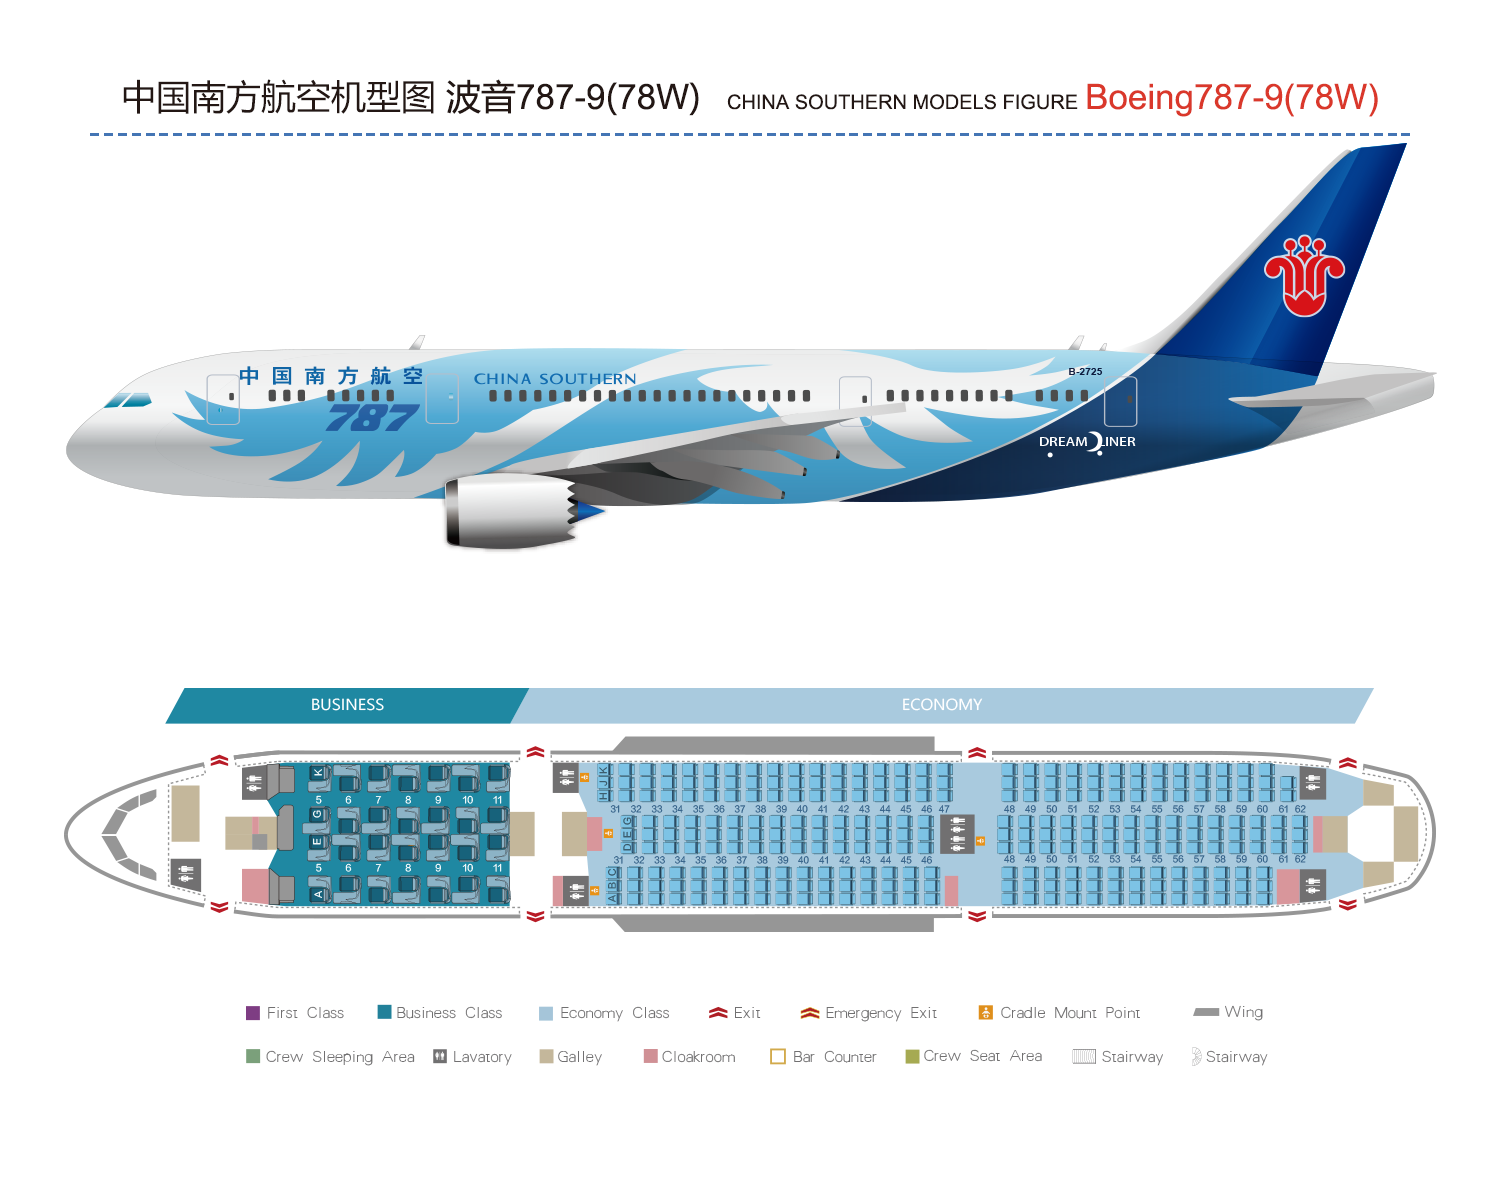 B787-9-Profile of Boeing Company-China Southern Airlines Co. Ltd 